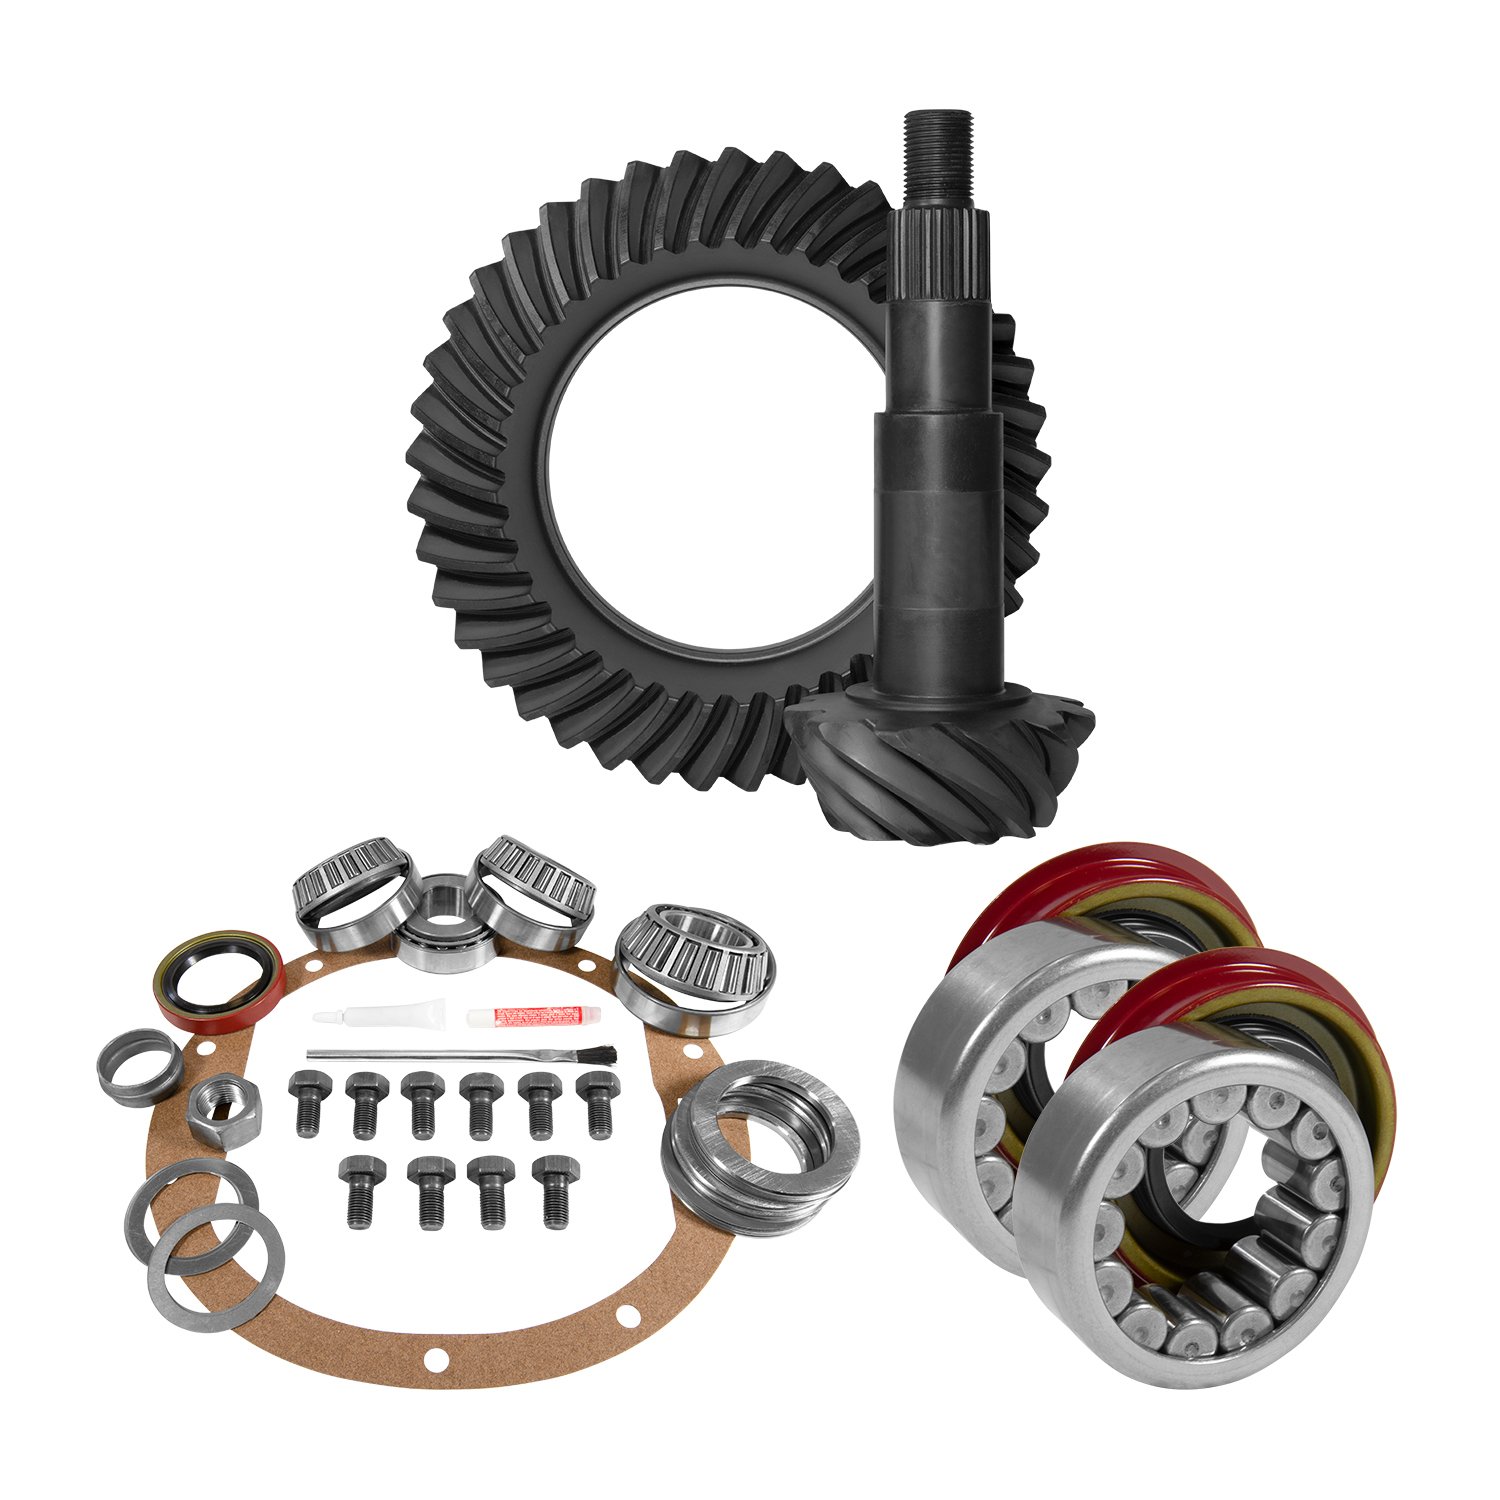 USA Standard 10722 8.5 in. GM 3.42 Rear Ring & Pinion Install Kit, Axle Bearings, 1.625 in. Case Journal